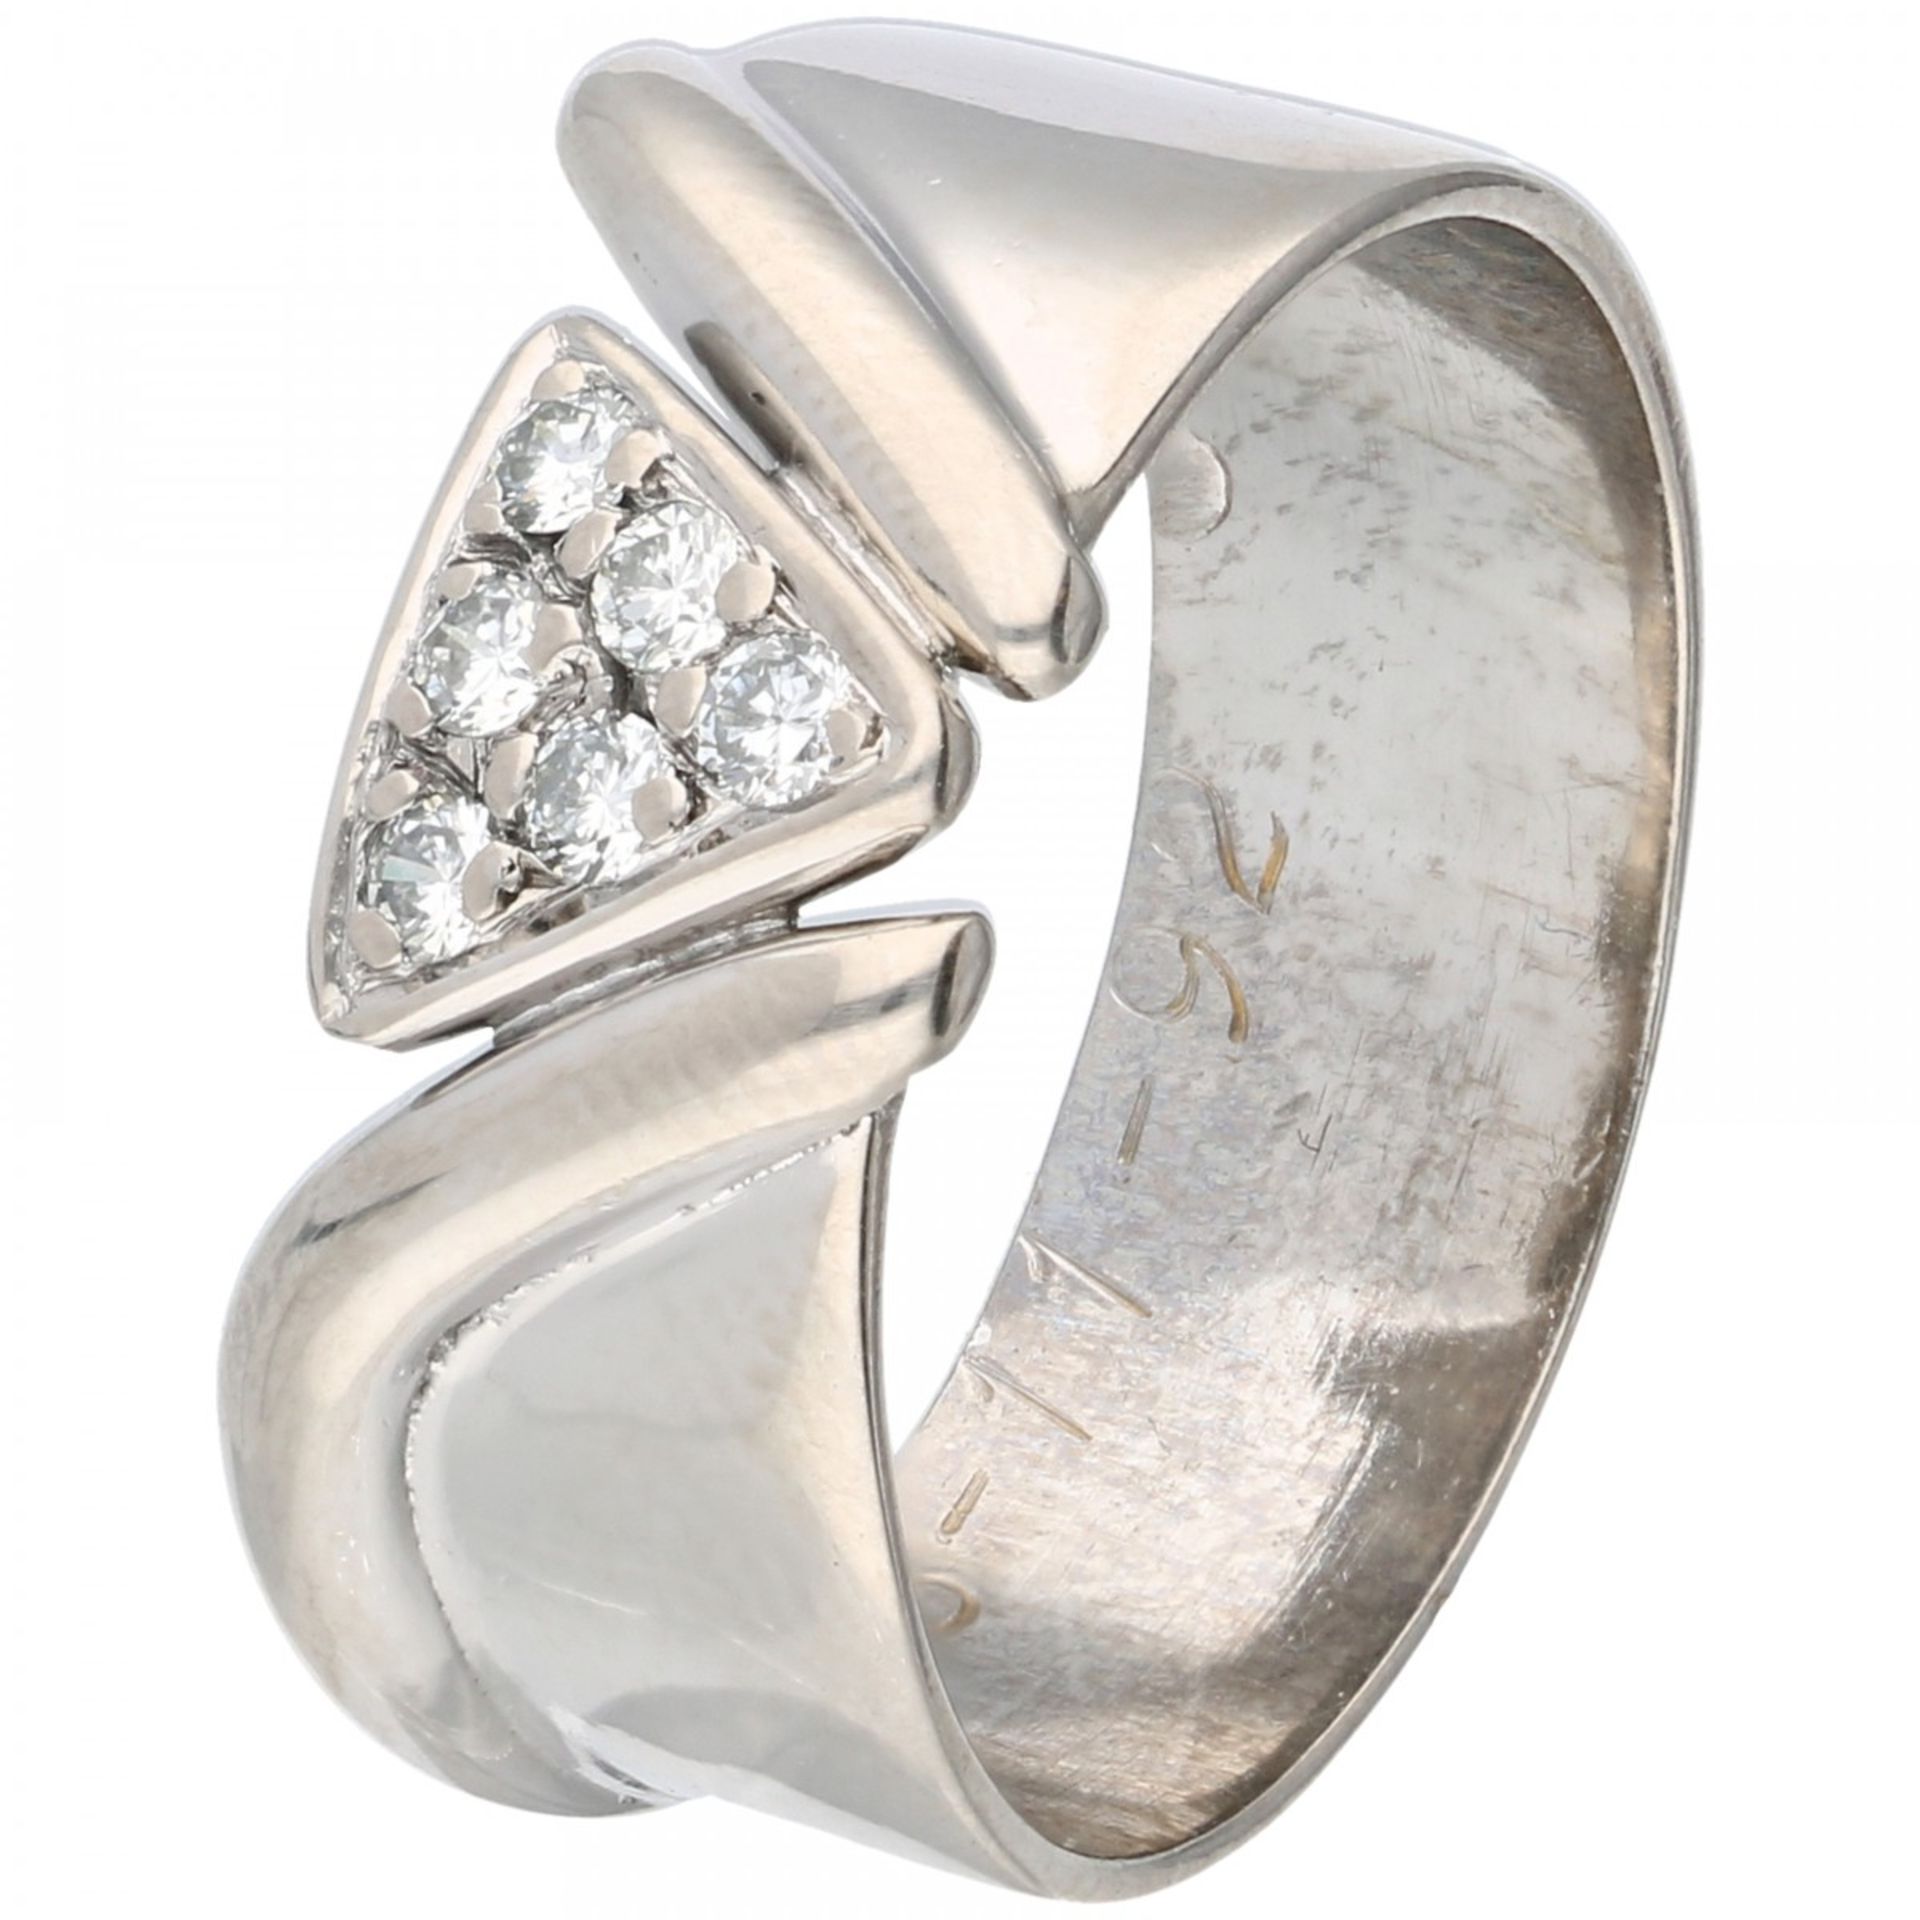 White gold band ring set with approx. 0.12 ct. diamond - 18 ct.